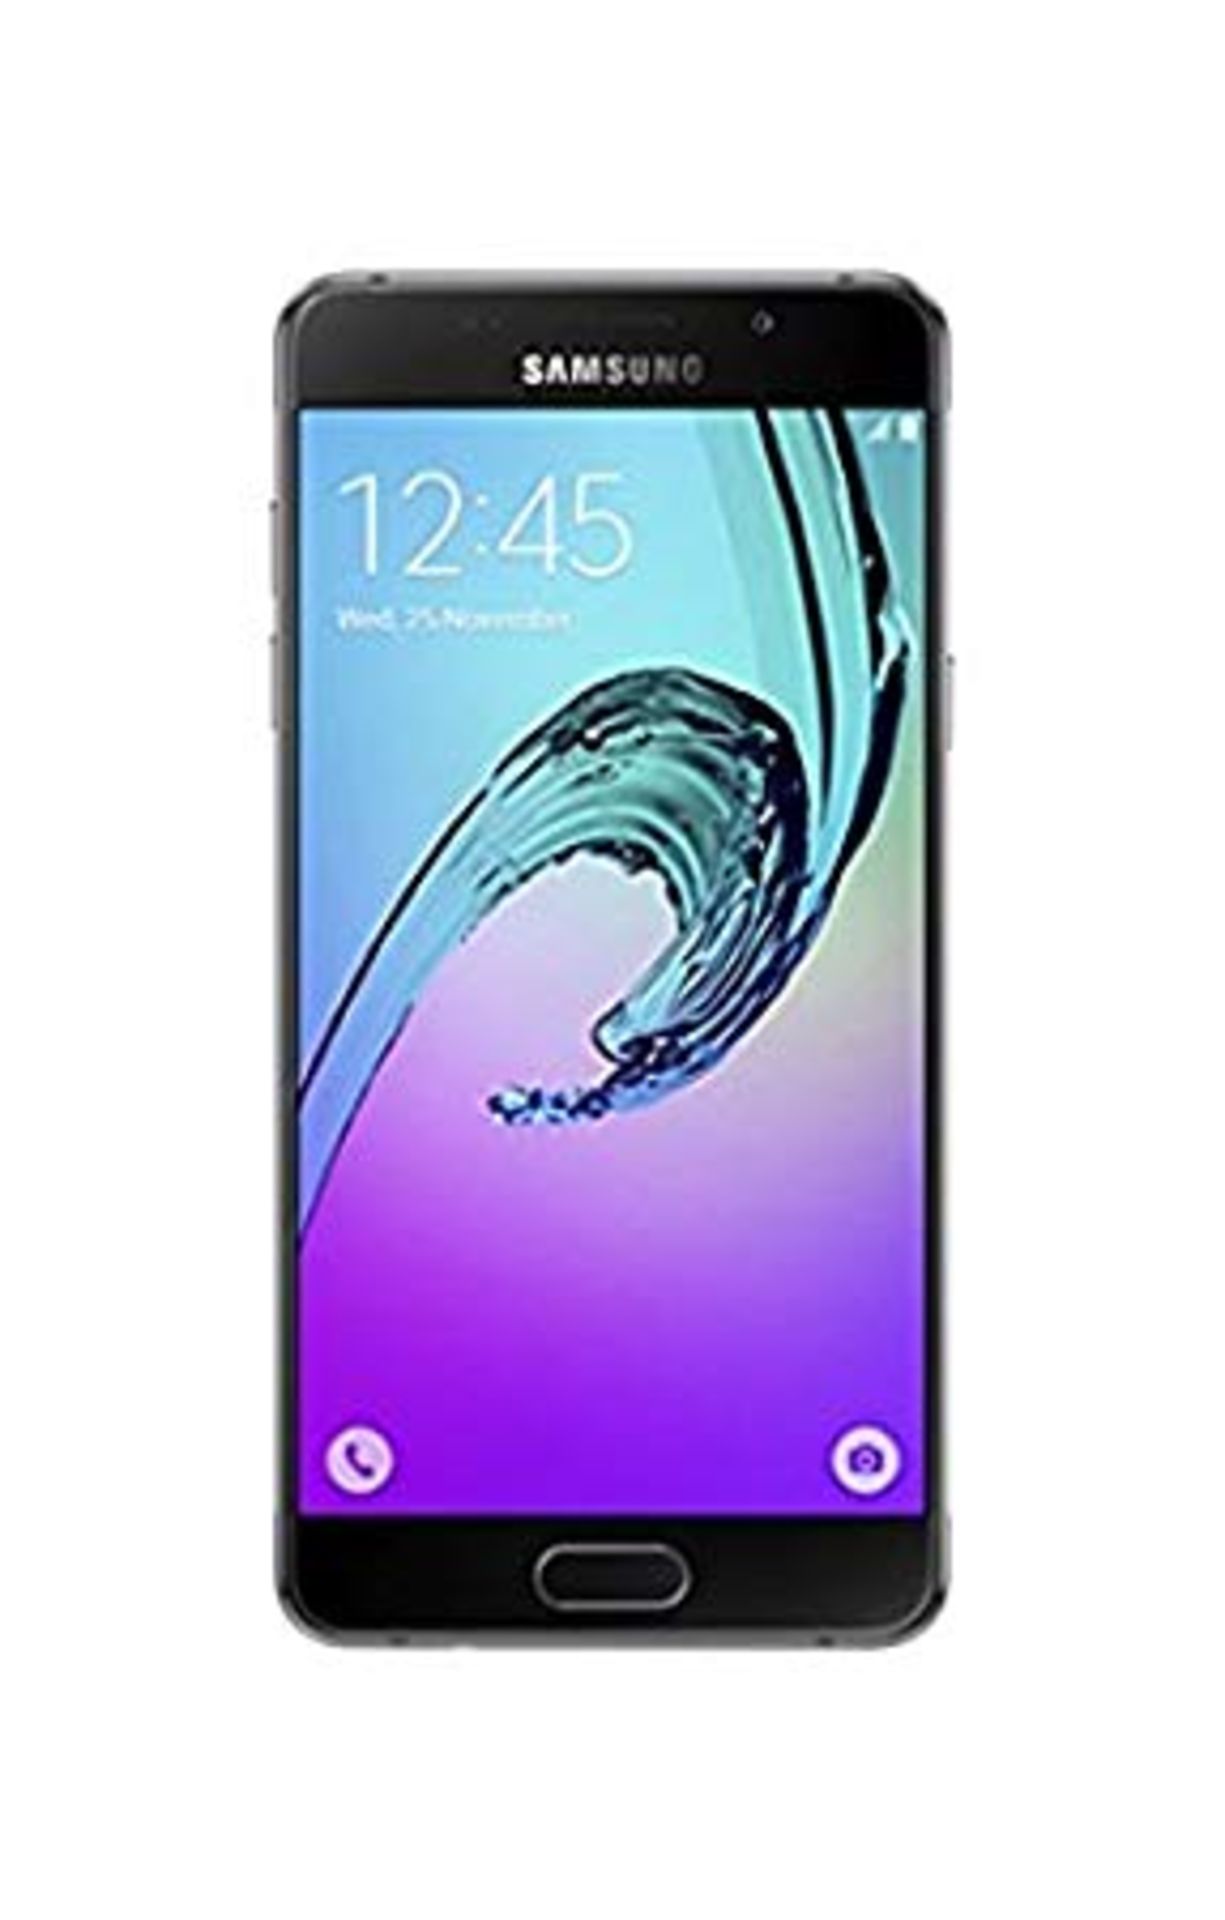 Grade A Samsung A5 ( A510F ) Colours May Vary Item available approx 15 working days after sale